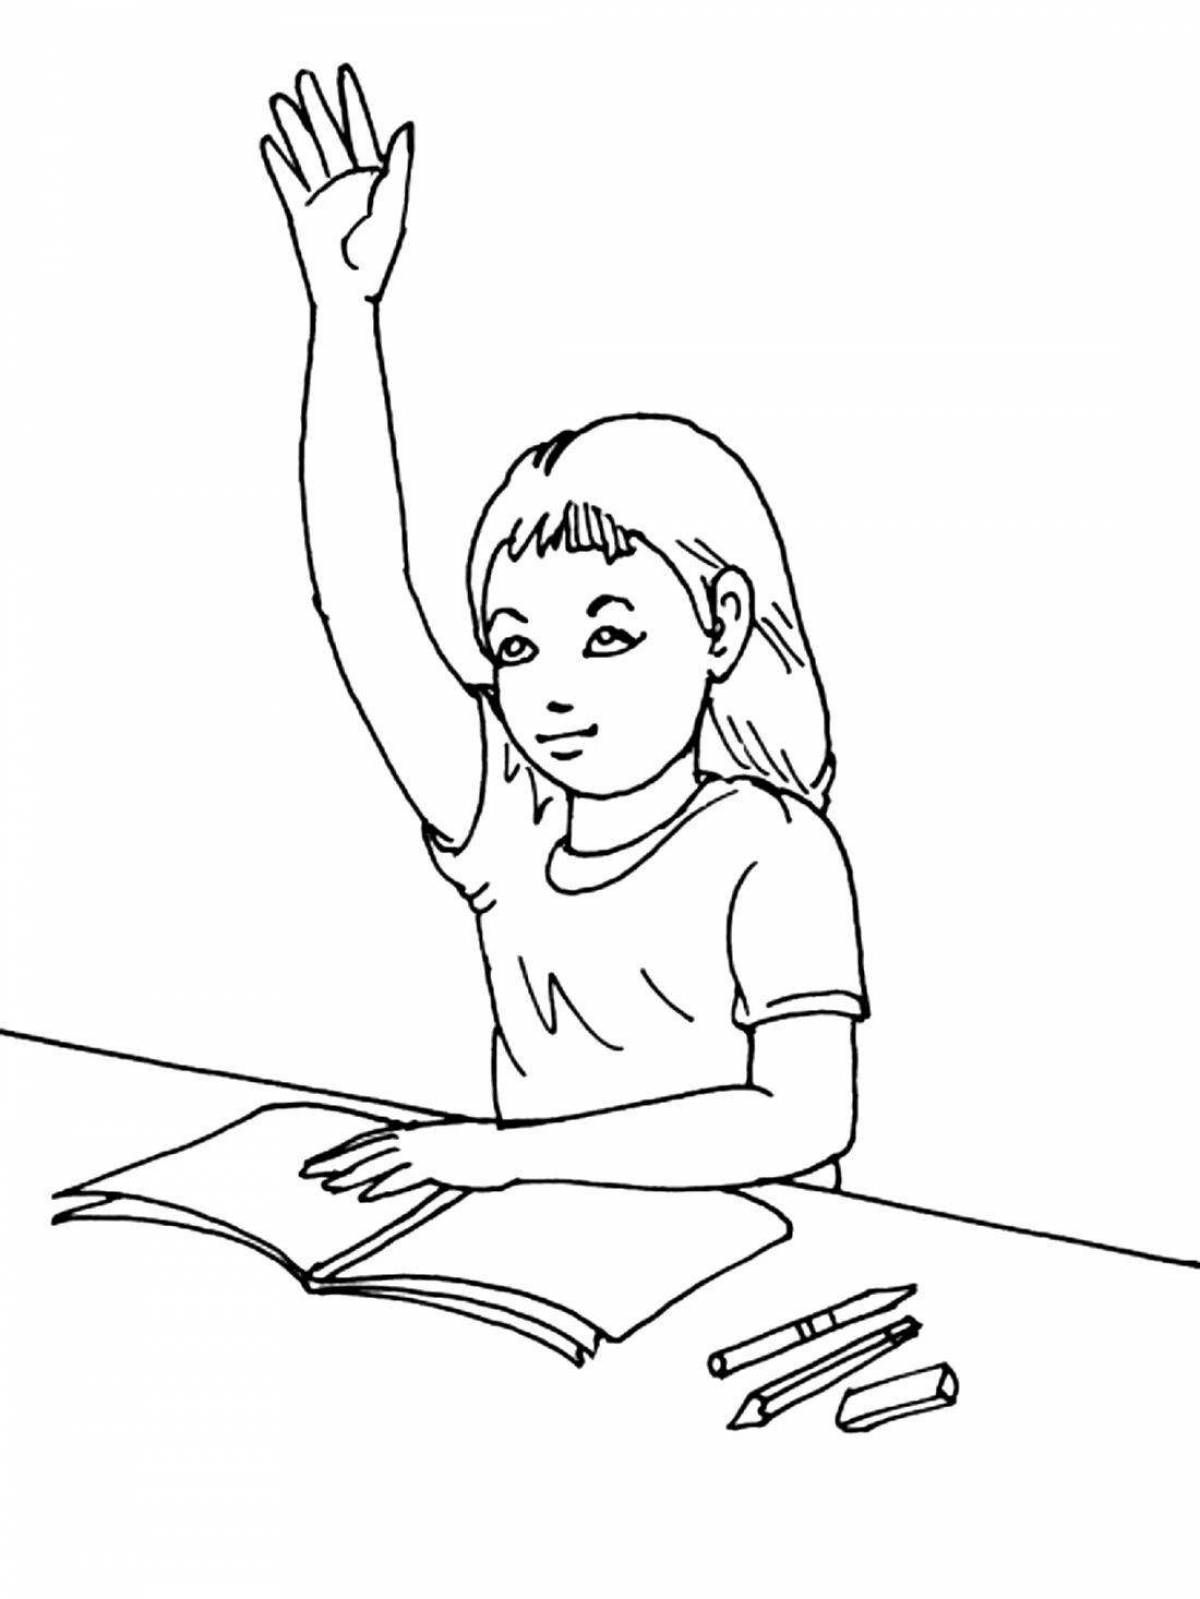 High school rules coloring book